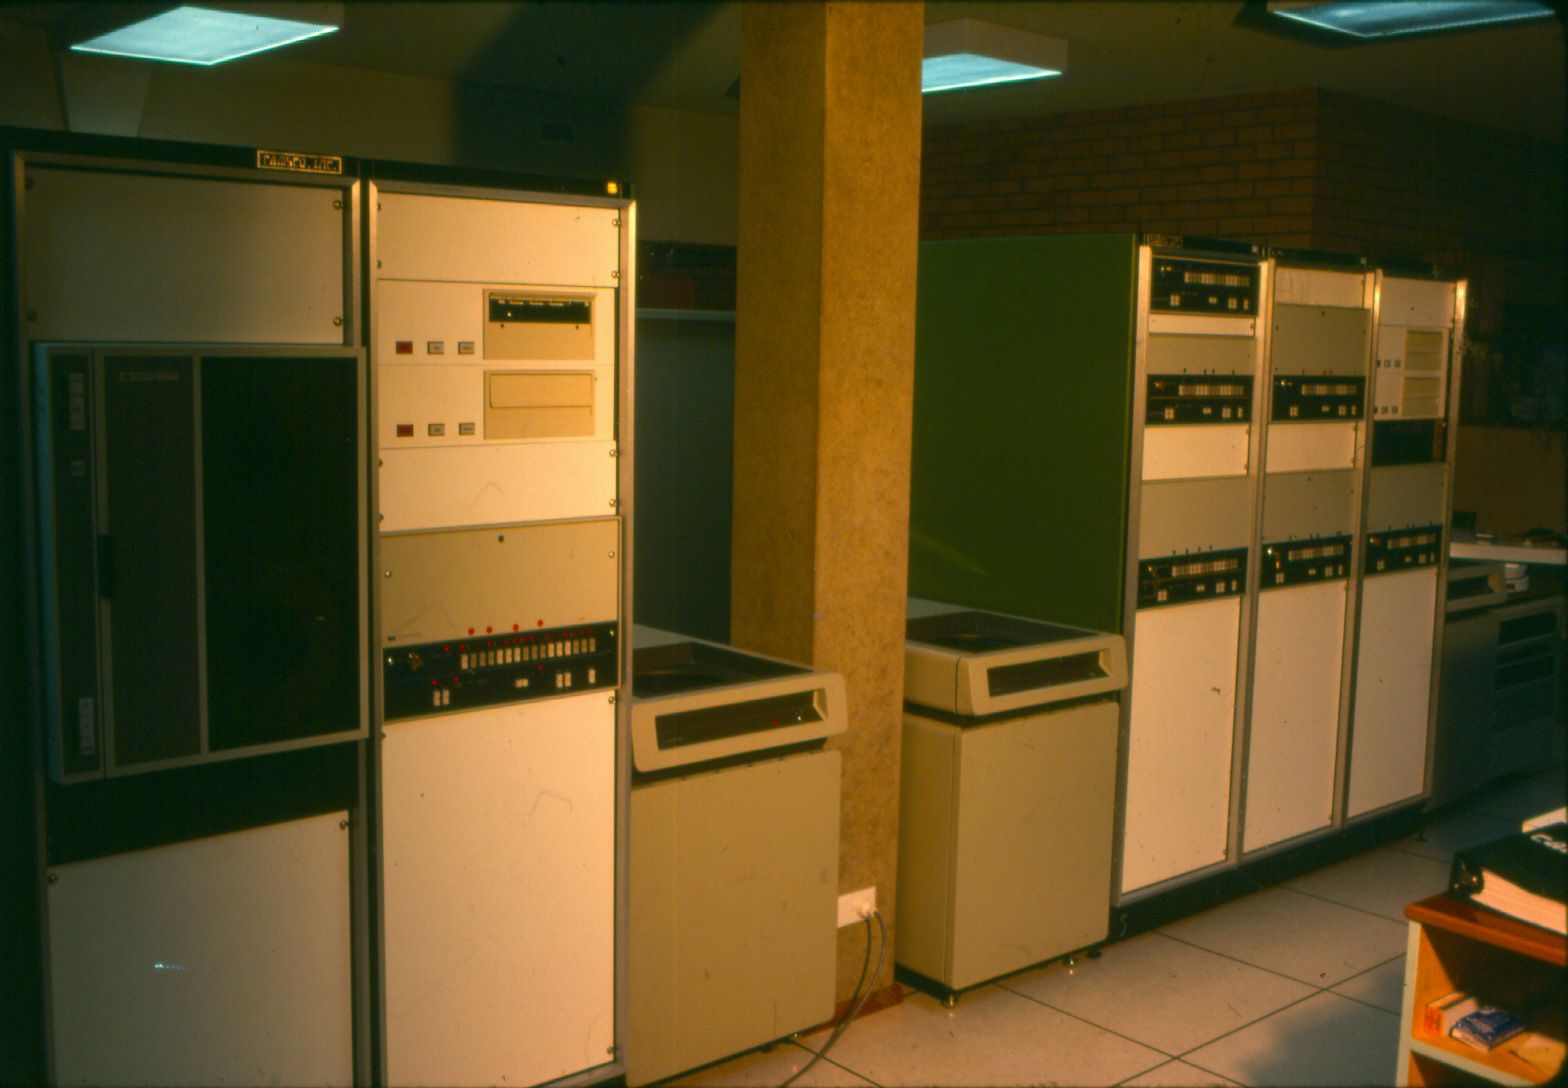 The computer bunker at FJs.  Photo: Jones Family Collection 